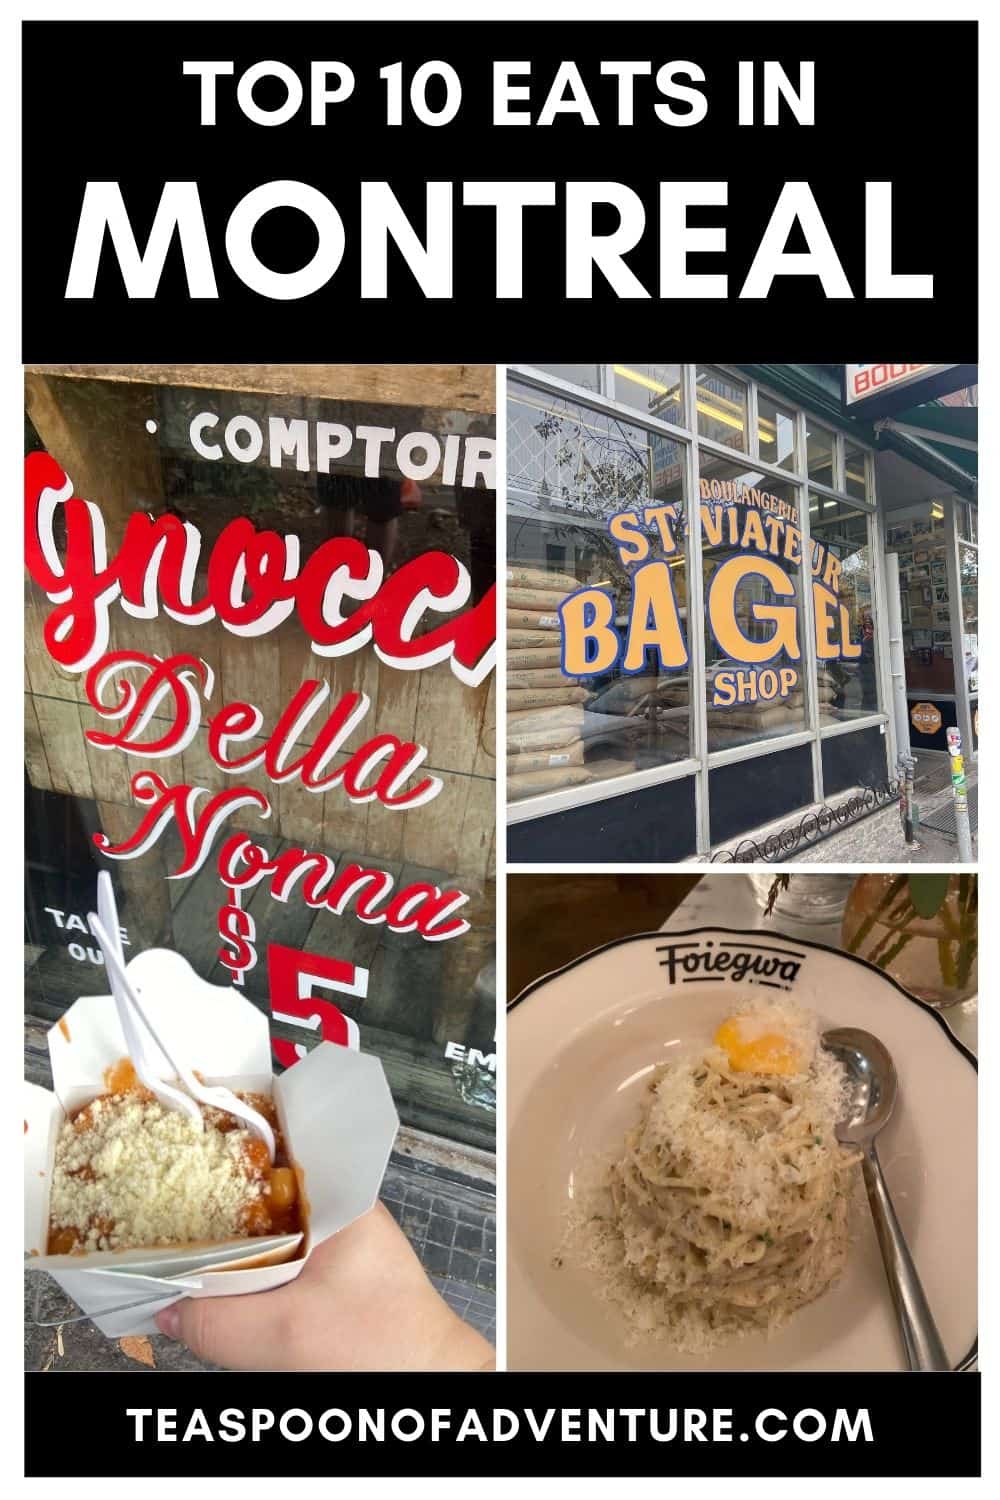 WHERE TO EAT IN MONTREAL: The top 10 meals you must eat in Montreal, Quebec, Canada! From poutine and bagels to so much more, enjoy your trip to Montreal with these delicious eats! #foodie #montreal #poutine #bagels #travel #canada #quebec #travelitinerary #travelblog #foodblog